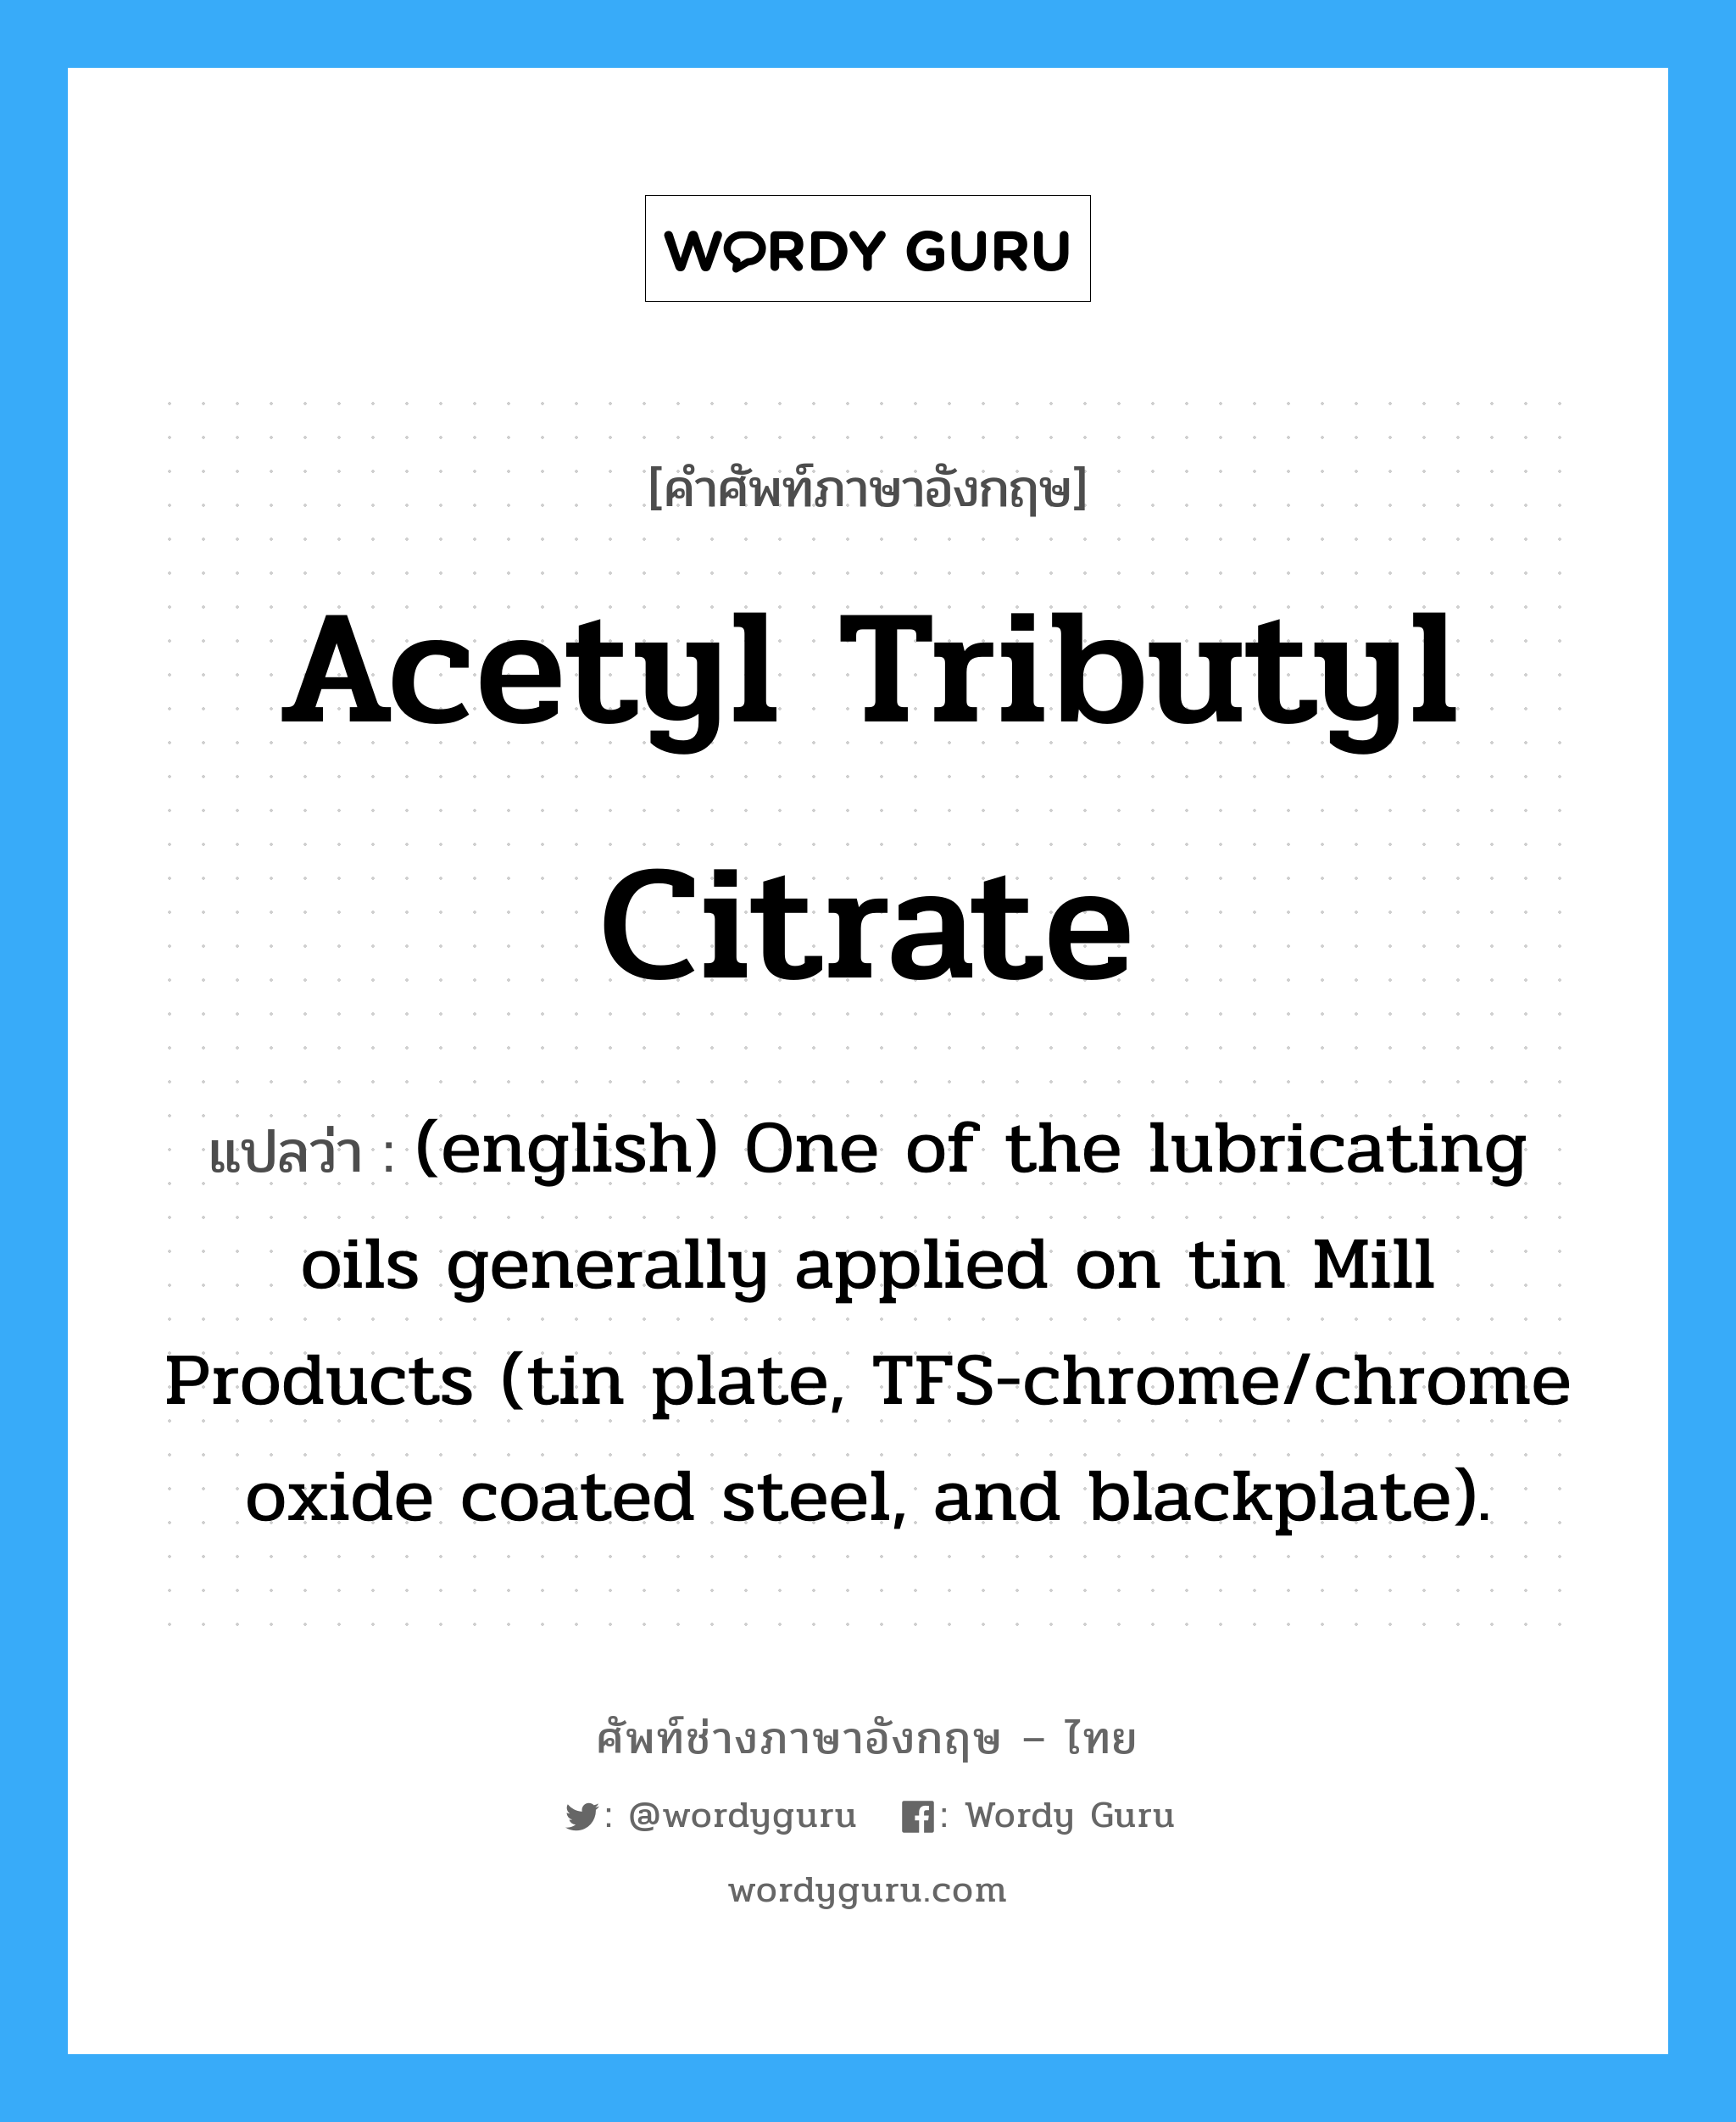 Acetyl Tributyl Citrate แปลว่า?, คำศัพท์ช่างภาษาอังกฤษ - ไทย Acetyl Tributyl Citrate คำศัพท์ภาษาอังกฤษ Acetyl Tributyl Citrate แปลว่า (english) One of the lubricating oils generally applied on tin Mill Products (tin plate, TFS-chrome/chrome oxide coated steel, and blackplate).